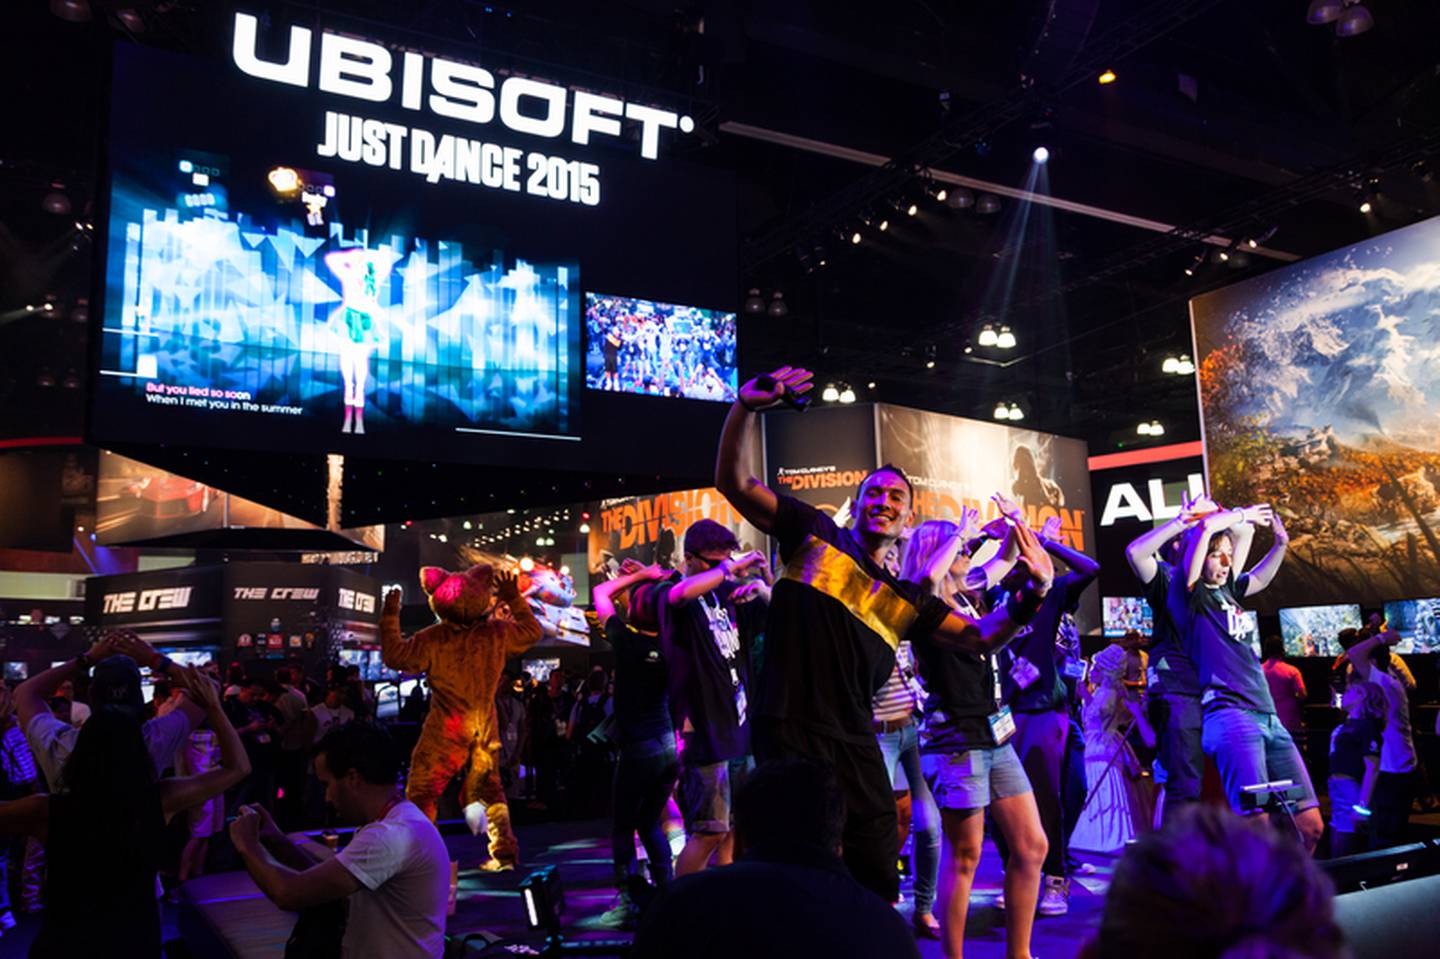 E3 is no longer going: the cancellation of the historic gamer event was confirmed